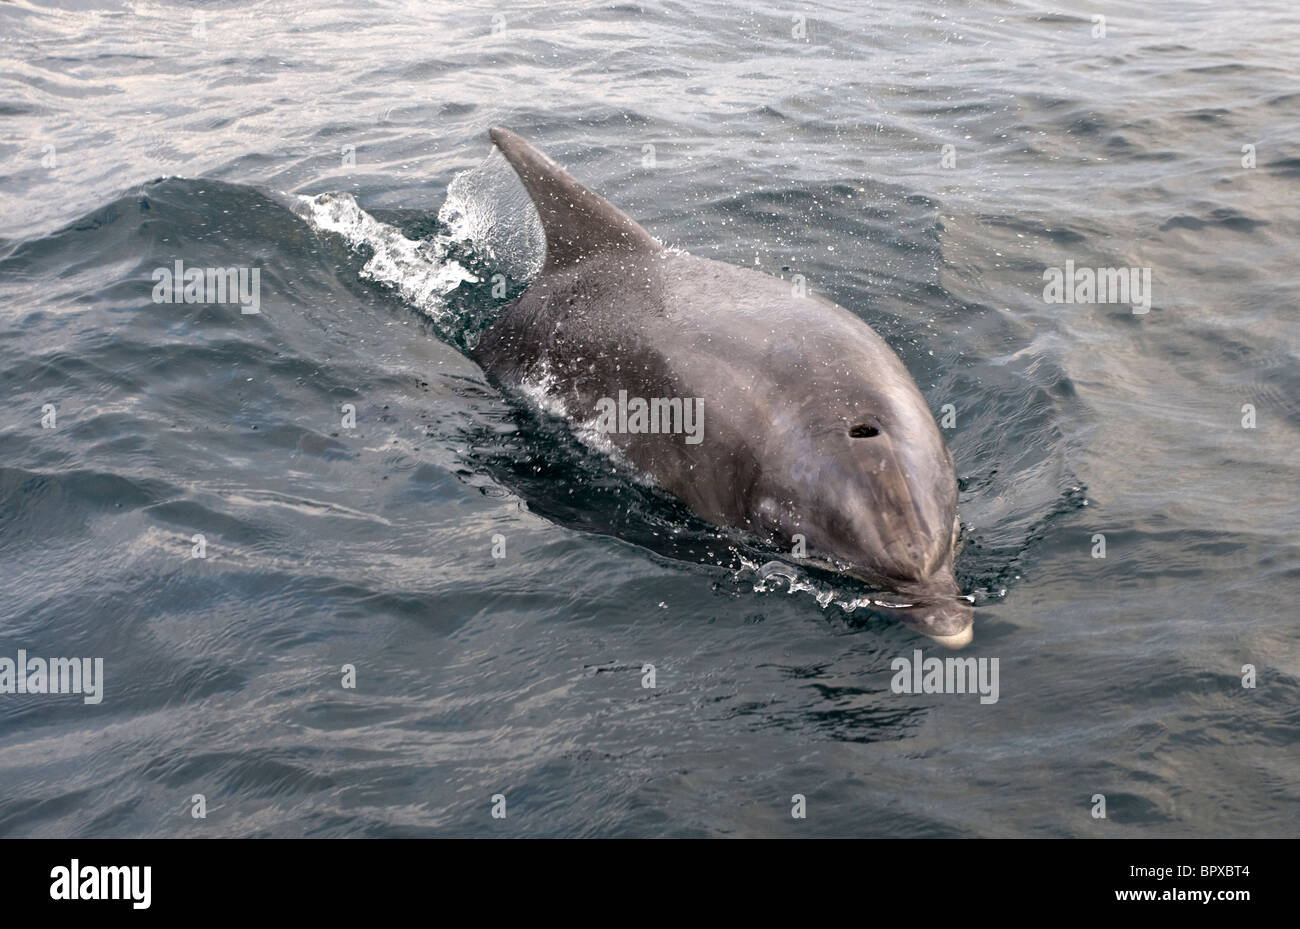 A Bottlenose Dolphin swimming in the Atlantic 10 miles North West of Hayle, Cornwall. Stock Photo